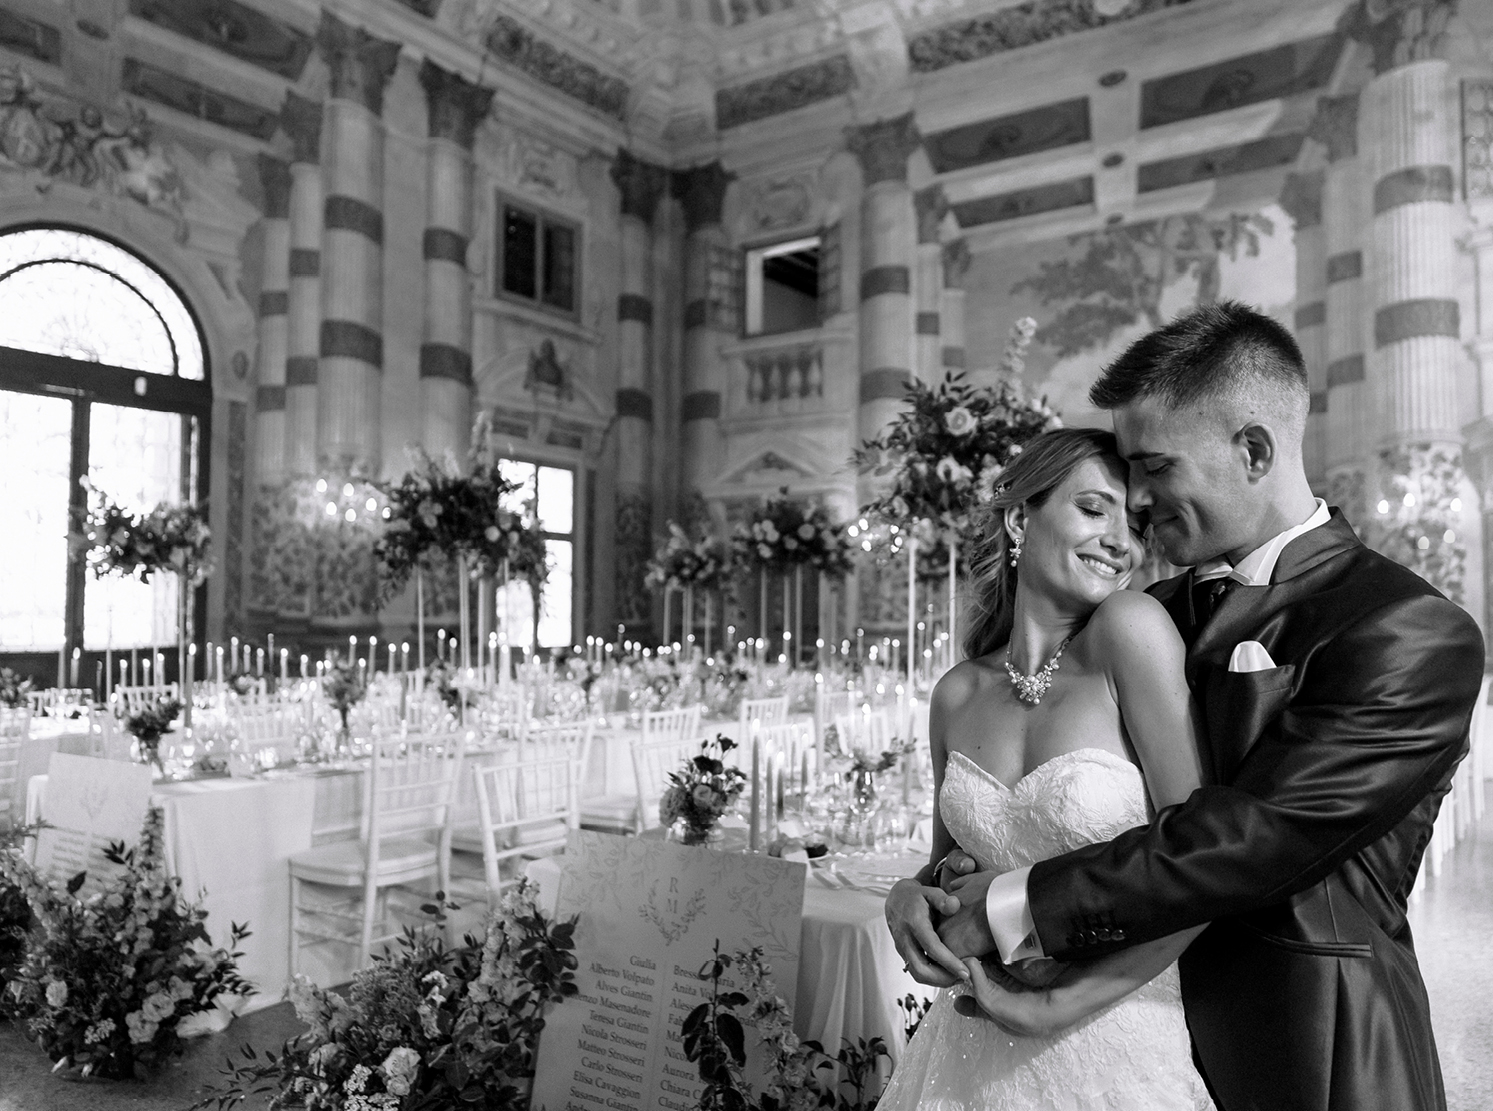 Luxury destination weddings in Italy. Your wedding planner for getting married in Italy. Venice and Riviera del Brenta most refined weddings.